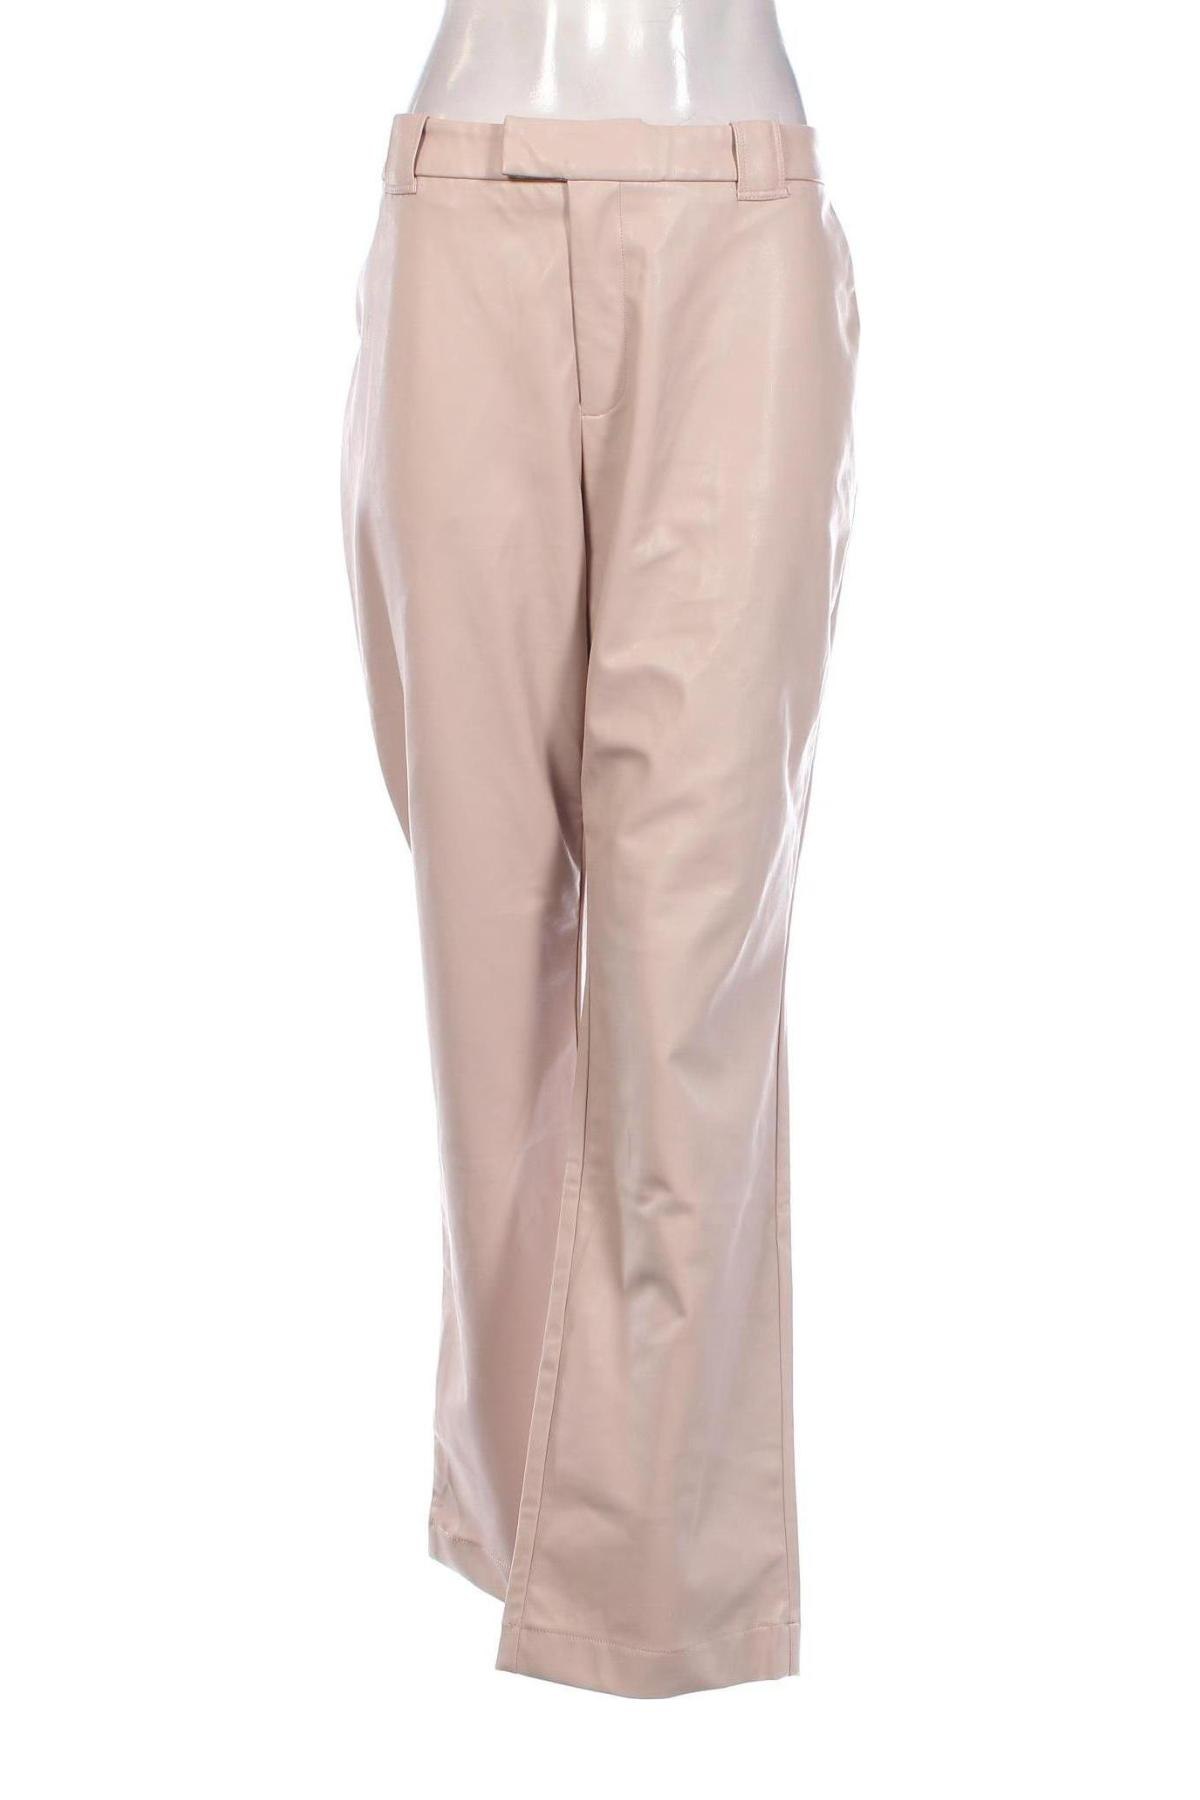 Damenhose Katy Perry exclusive for ABOUT YOU, Größe XL, Farbe Rosa, Preis 23,97 €